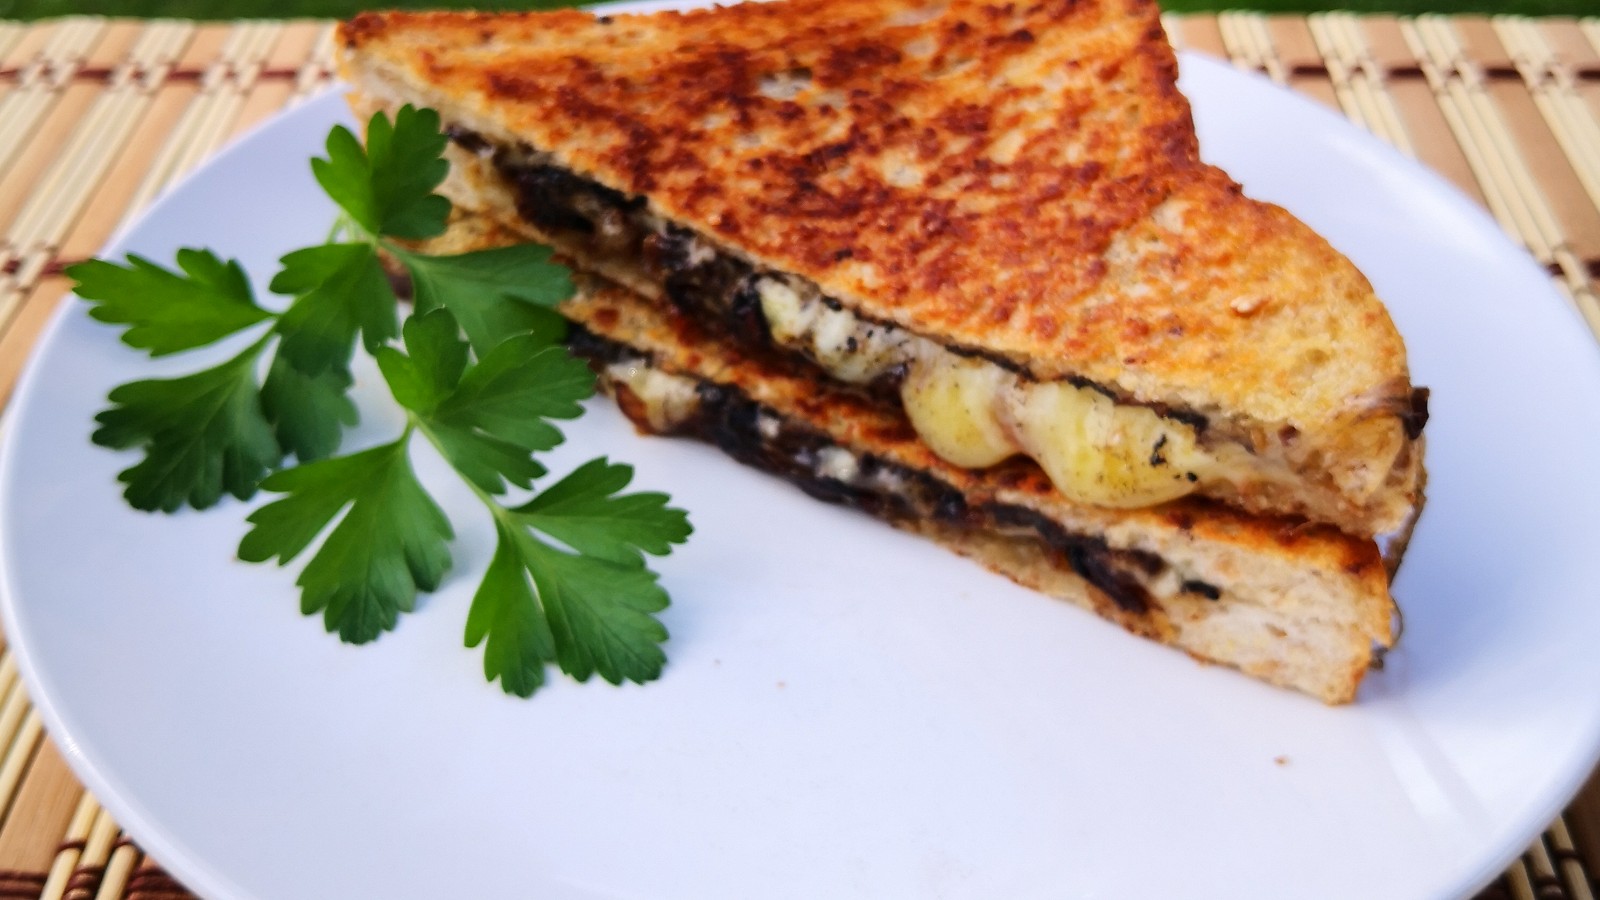 Image of Black Garlic and Cheese Toastie